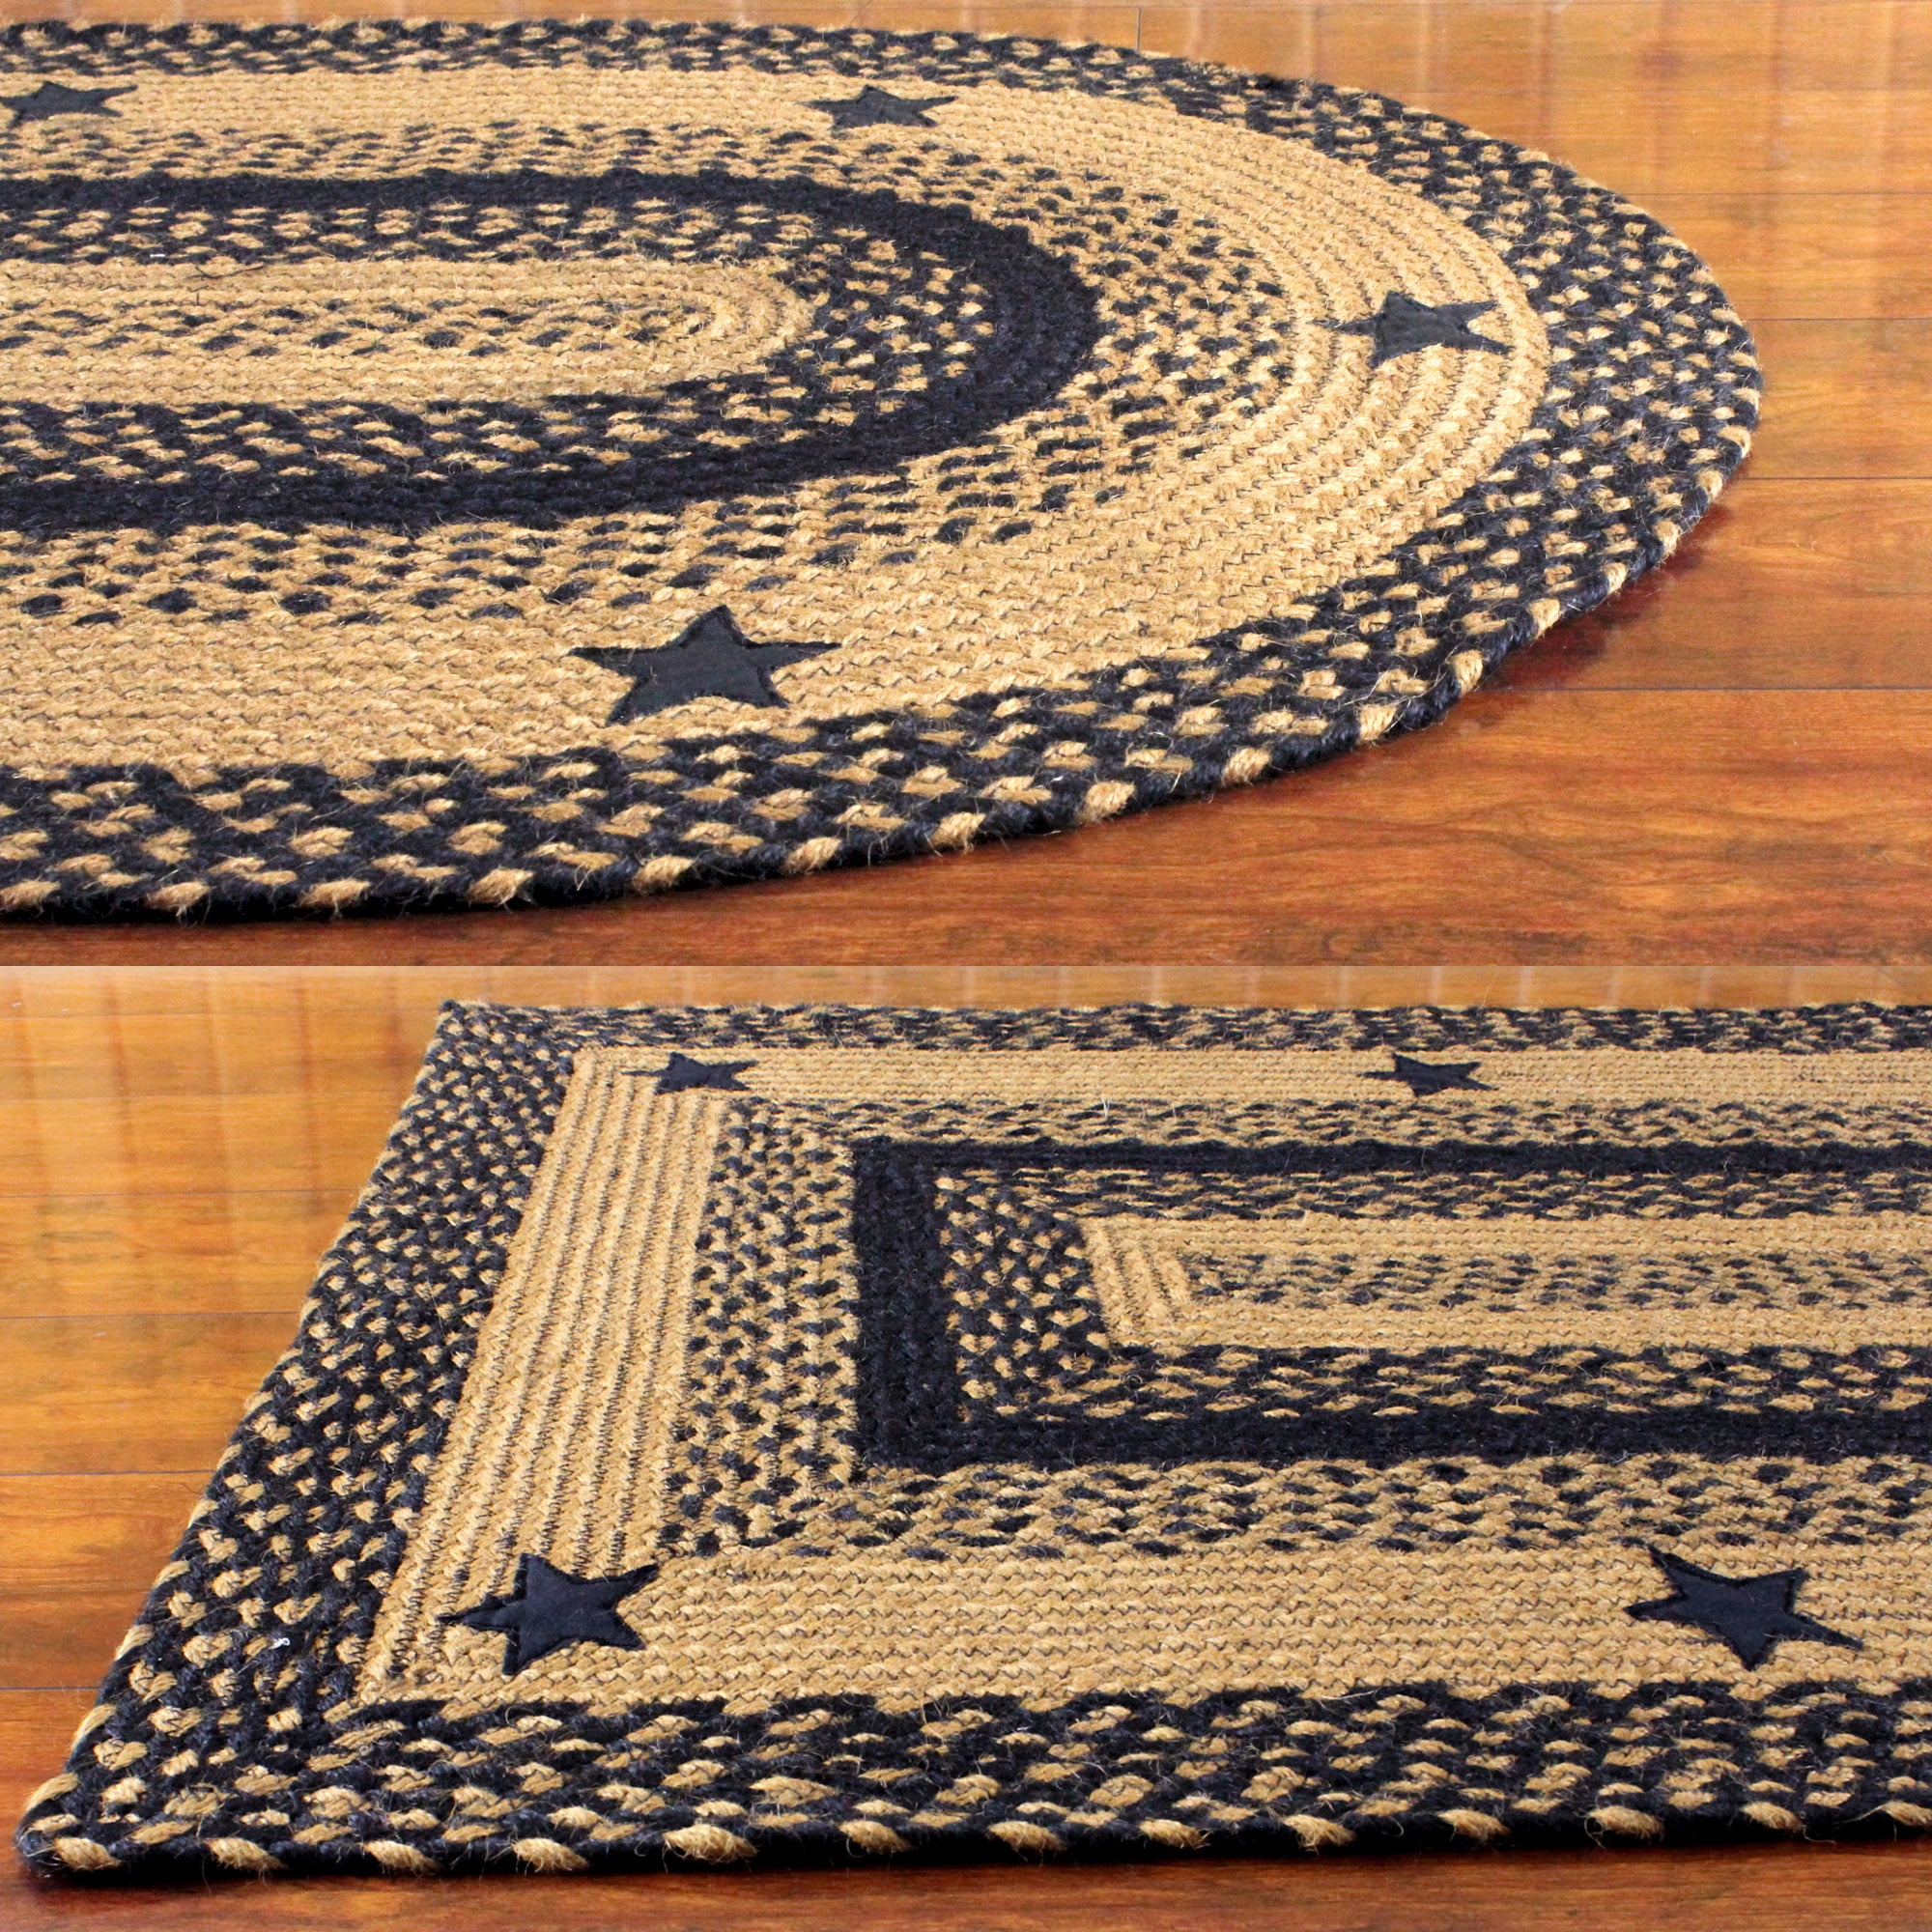 Black and Tan Braided Rug with Stars Primitive Country Oval